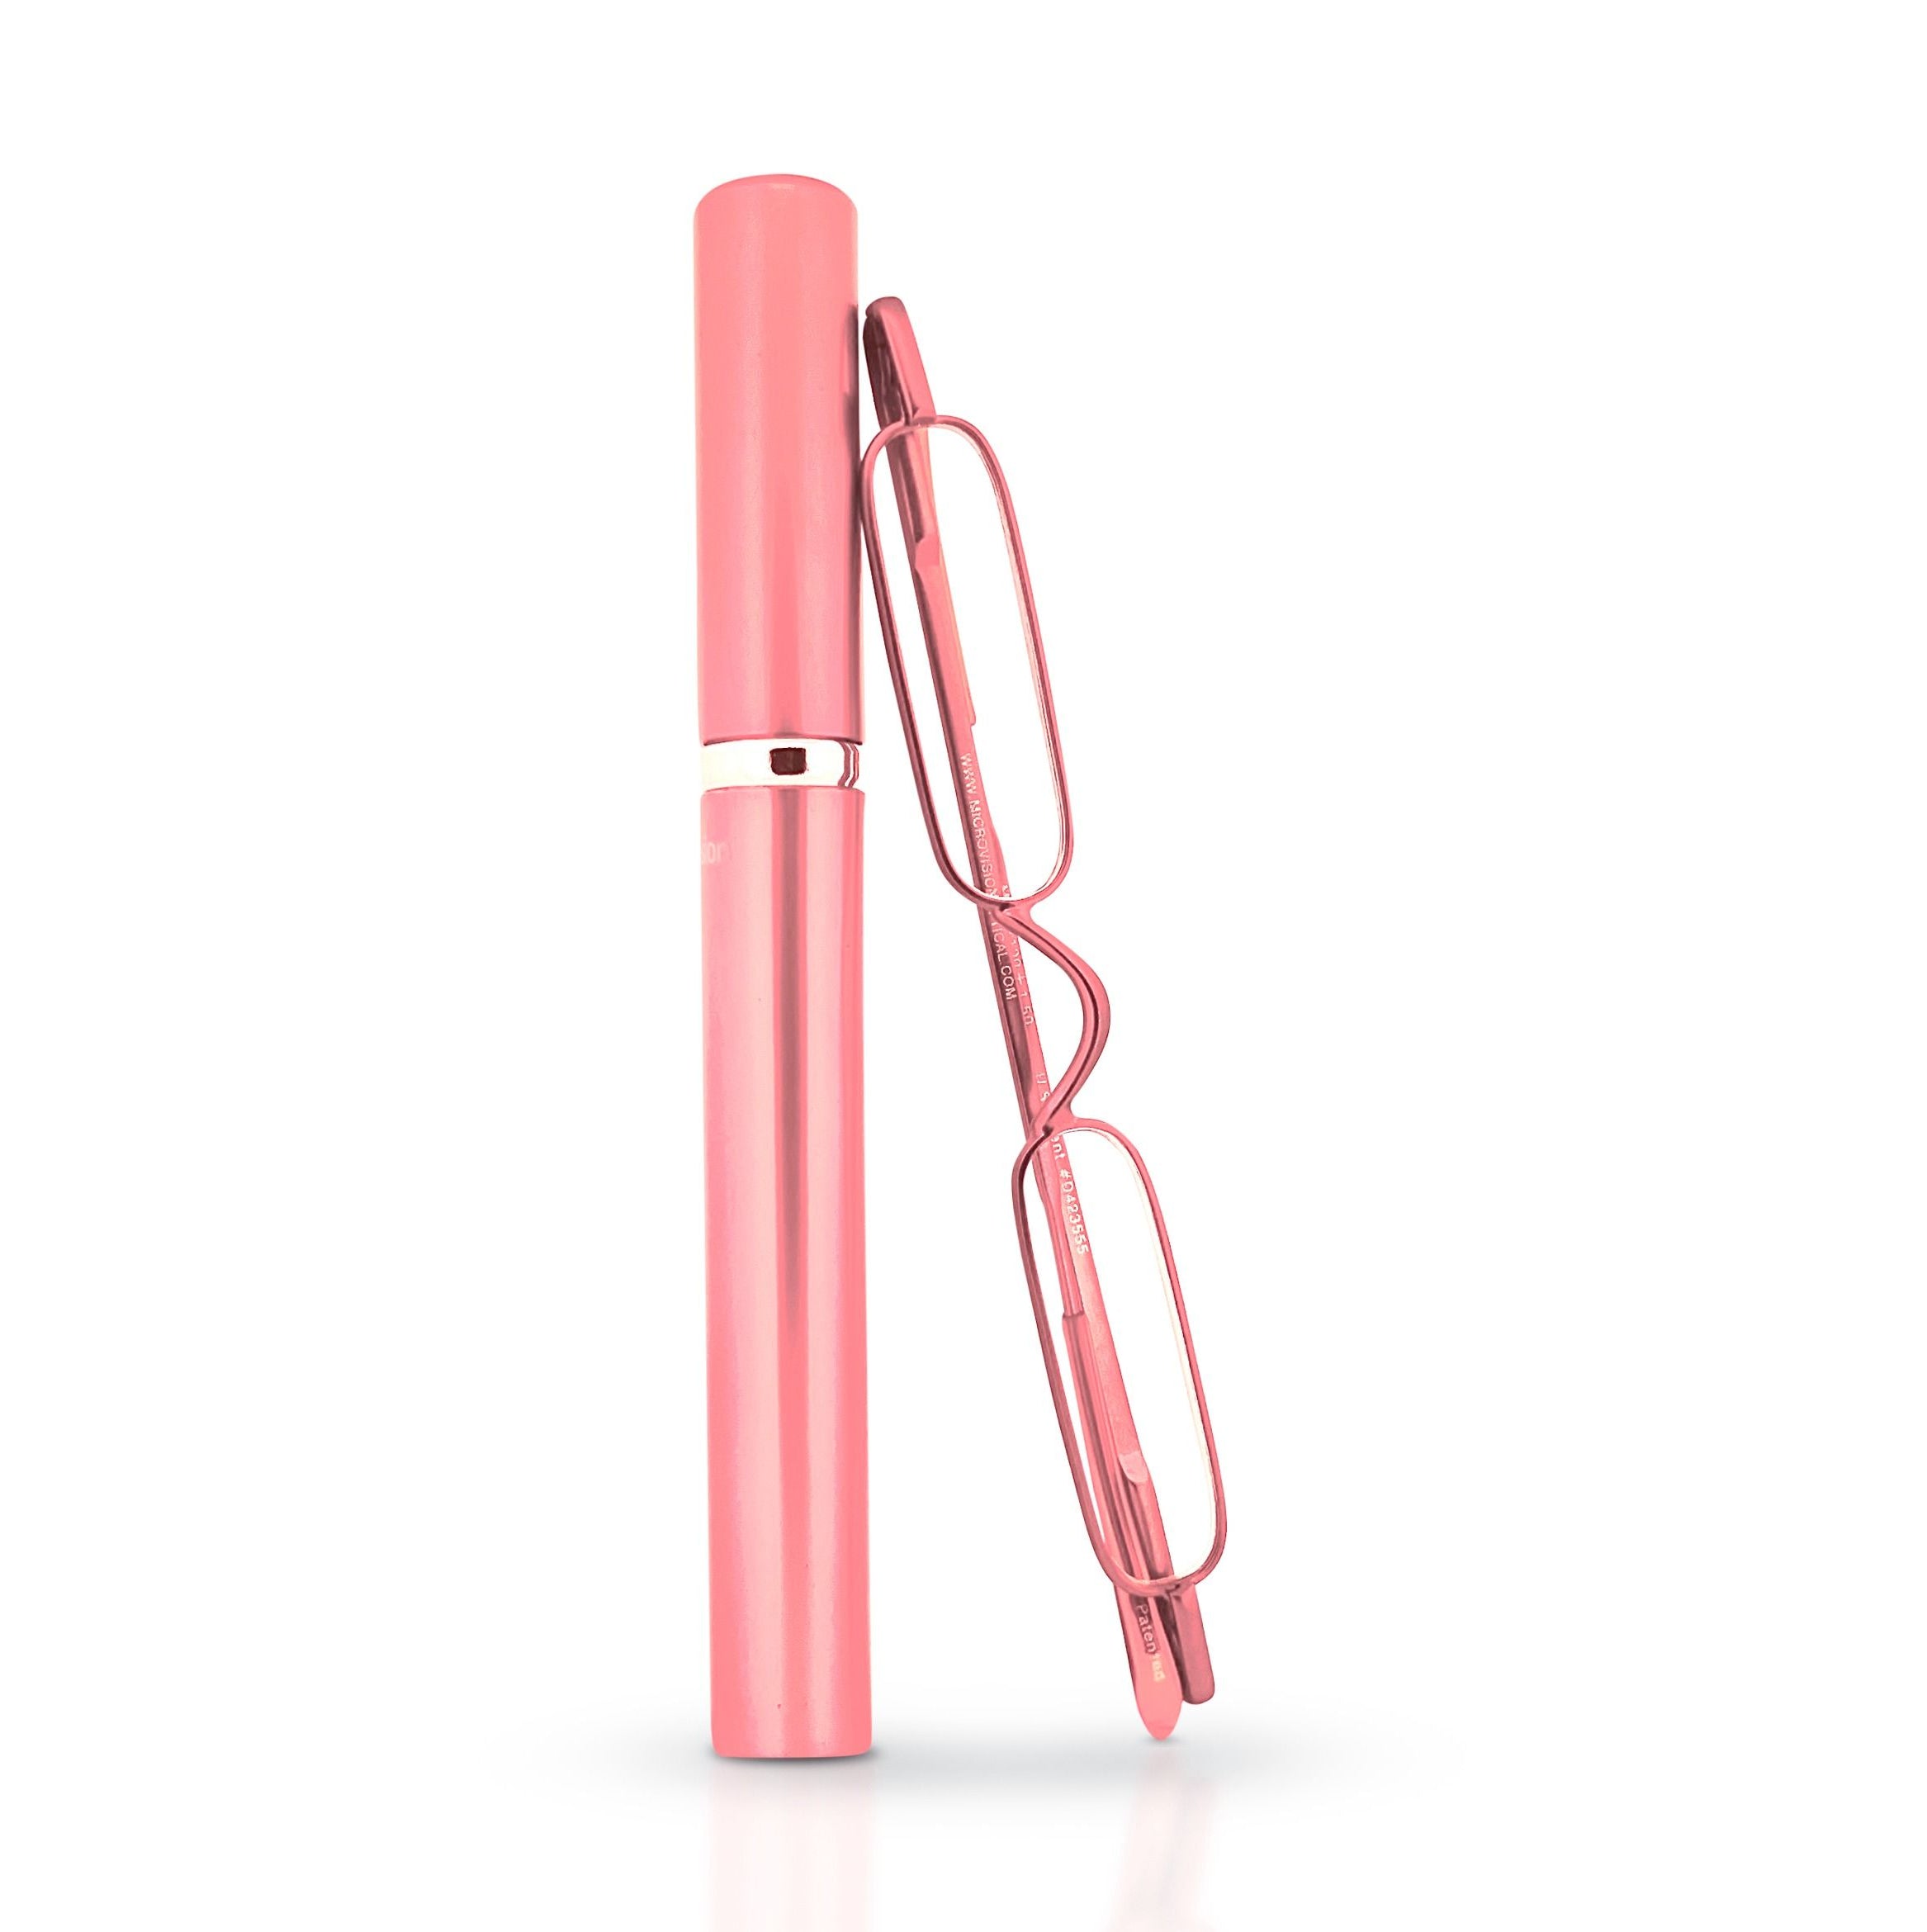 Pink sleek, compact, patented, stainless steel, original mini readers perfect for on the go